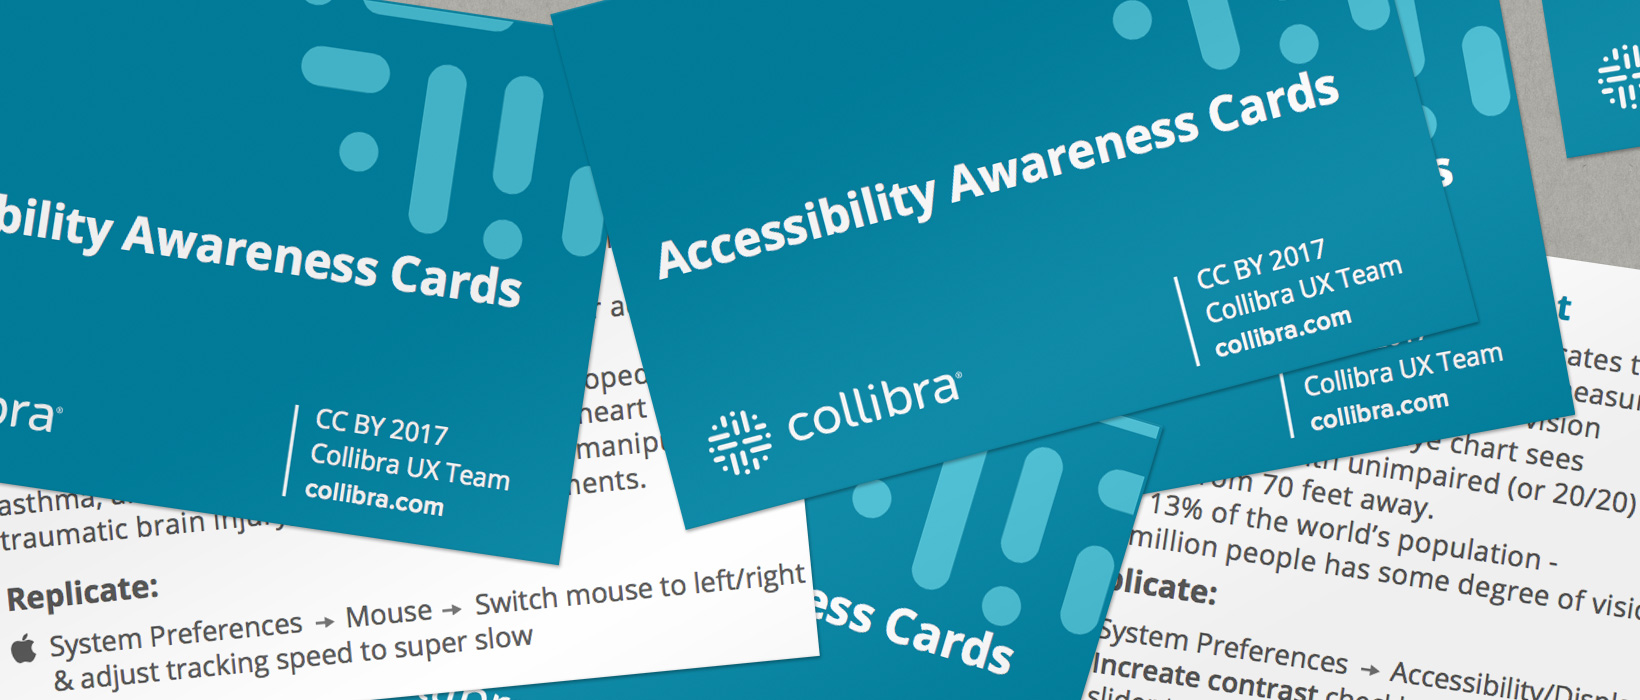 The 'accessibility awareness cards' we used for this event.